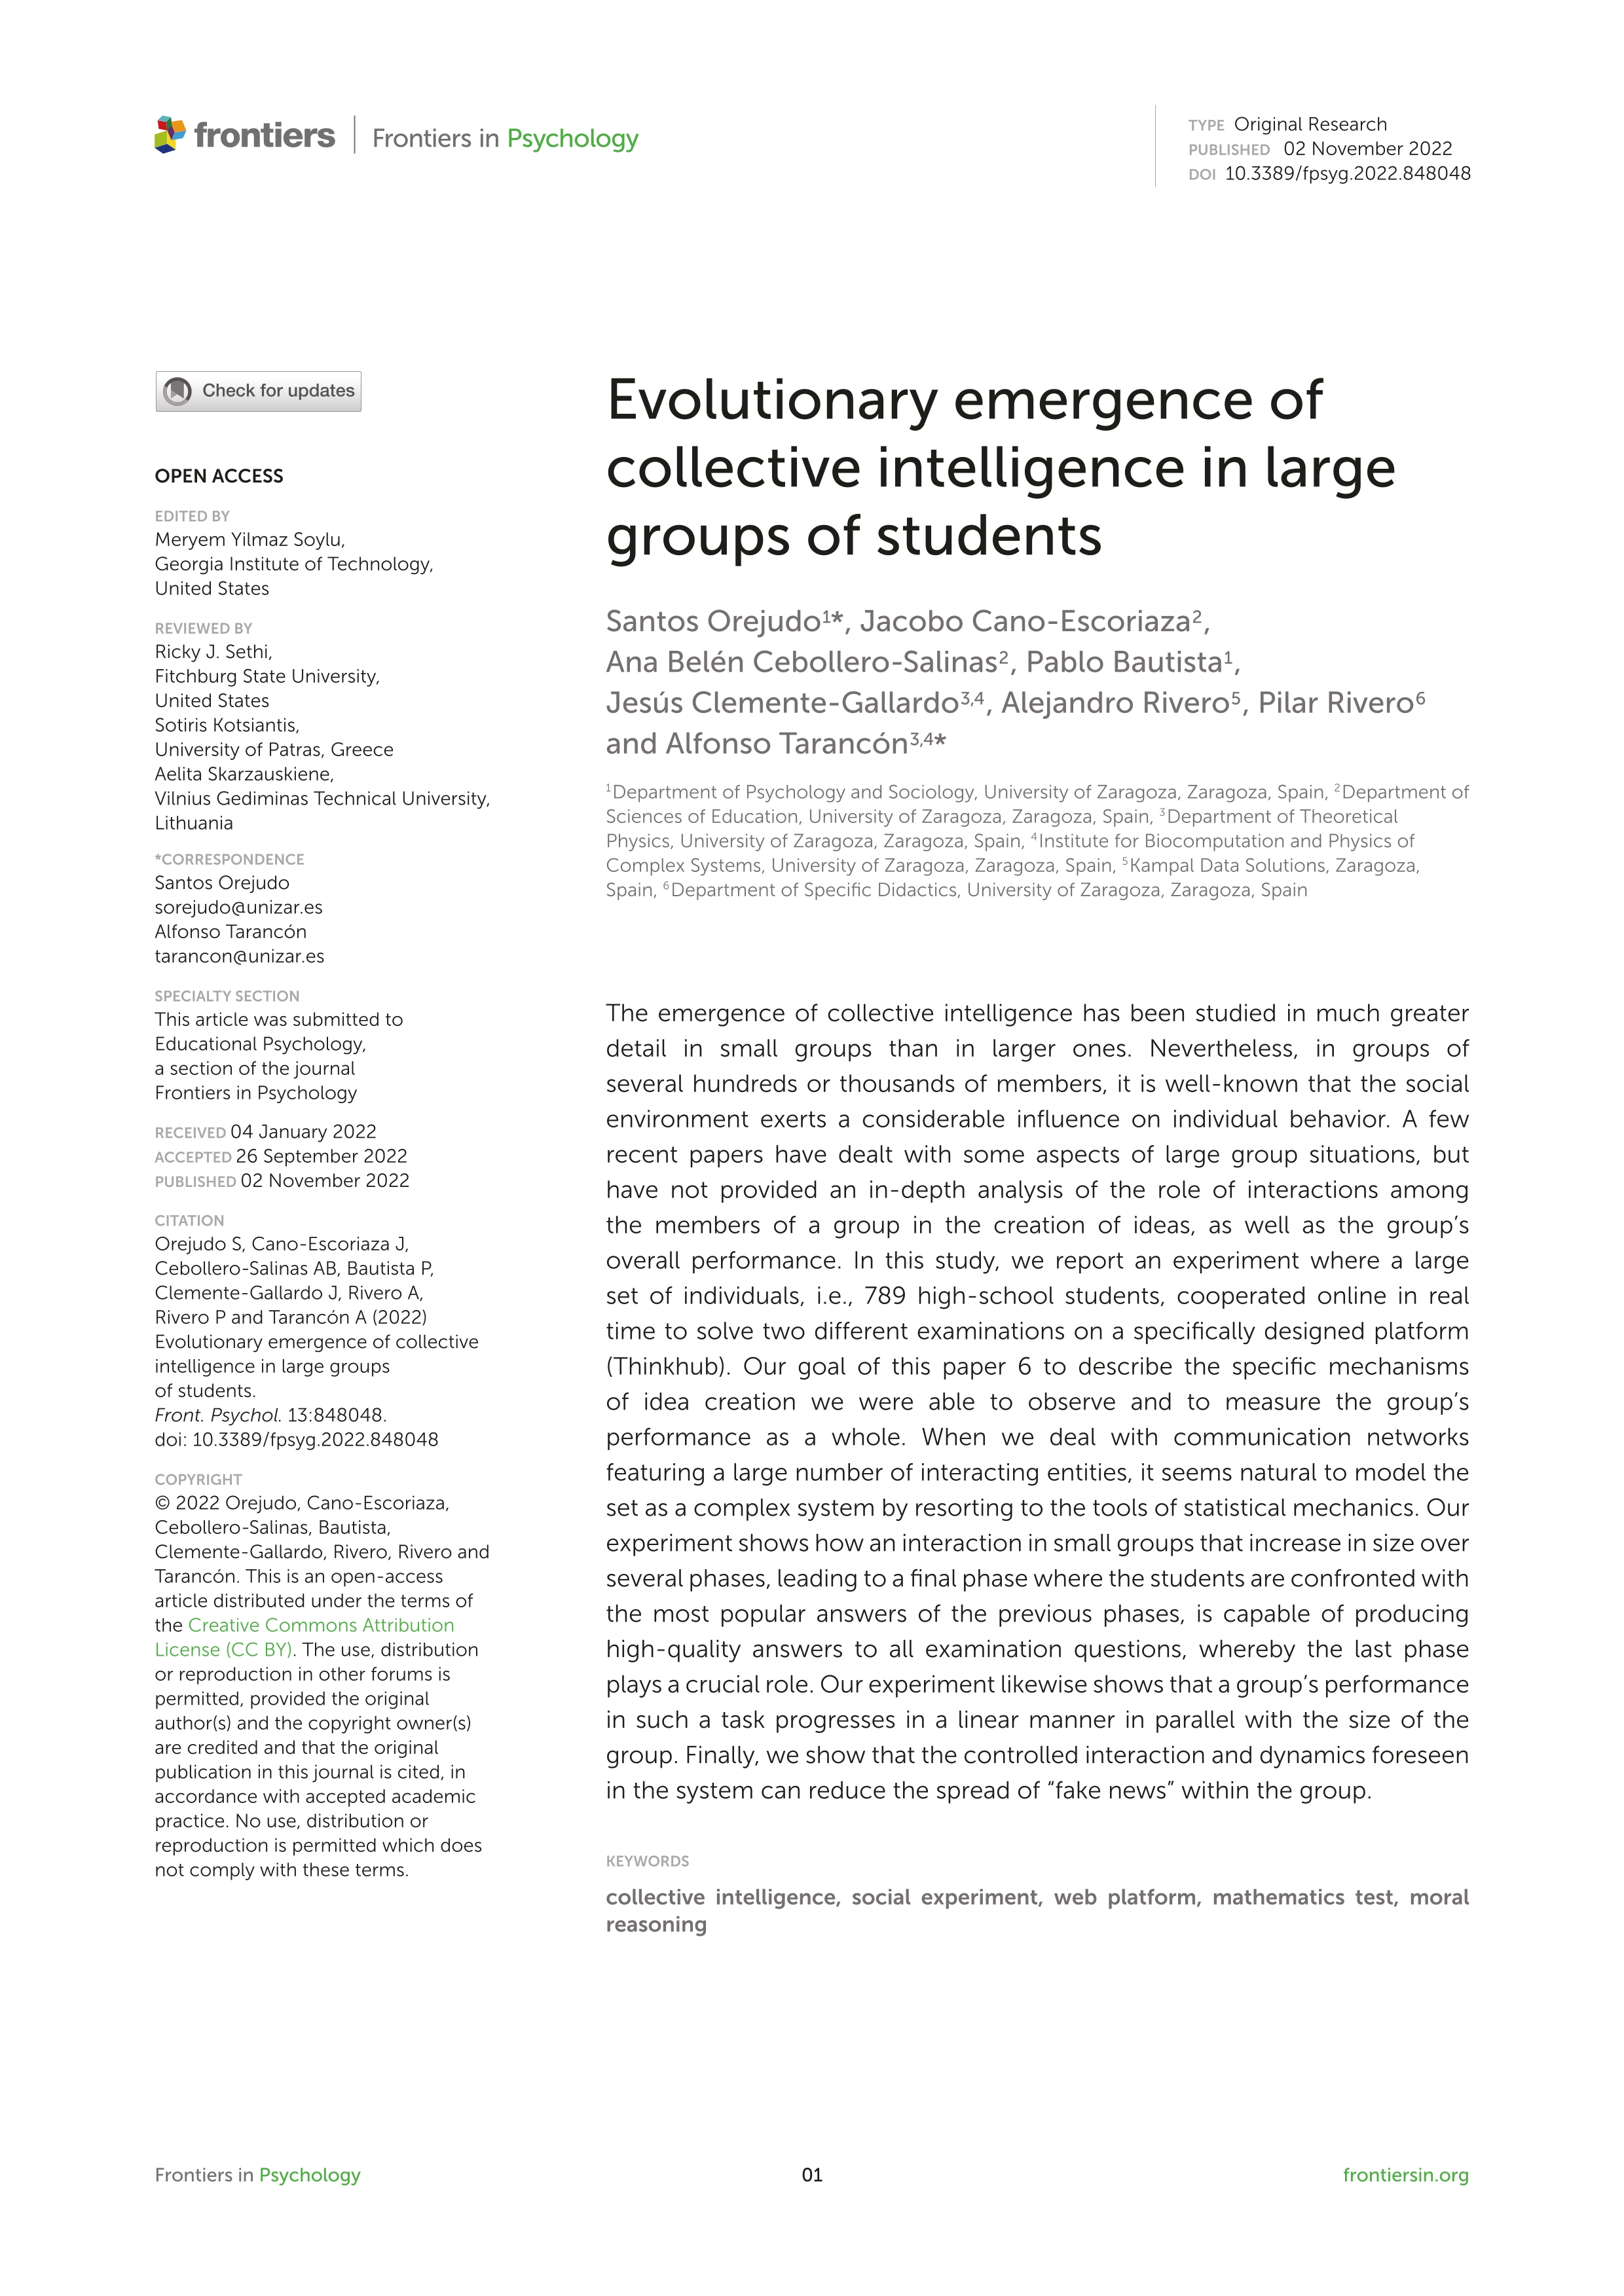 Evolutionary emergence of collective intelligence in large groups of students